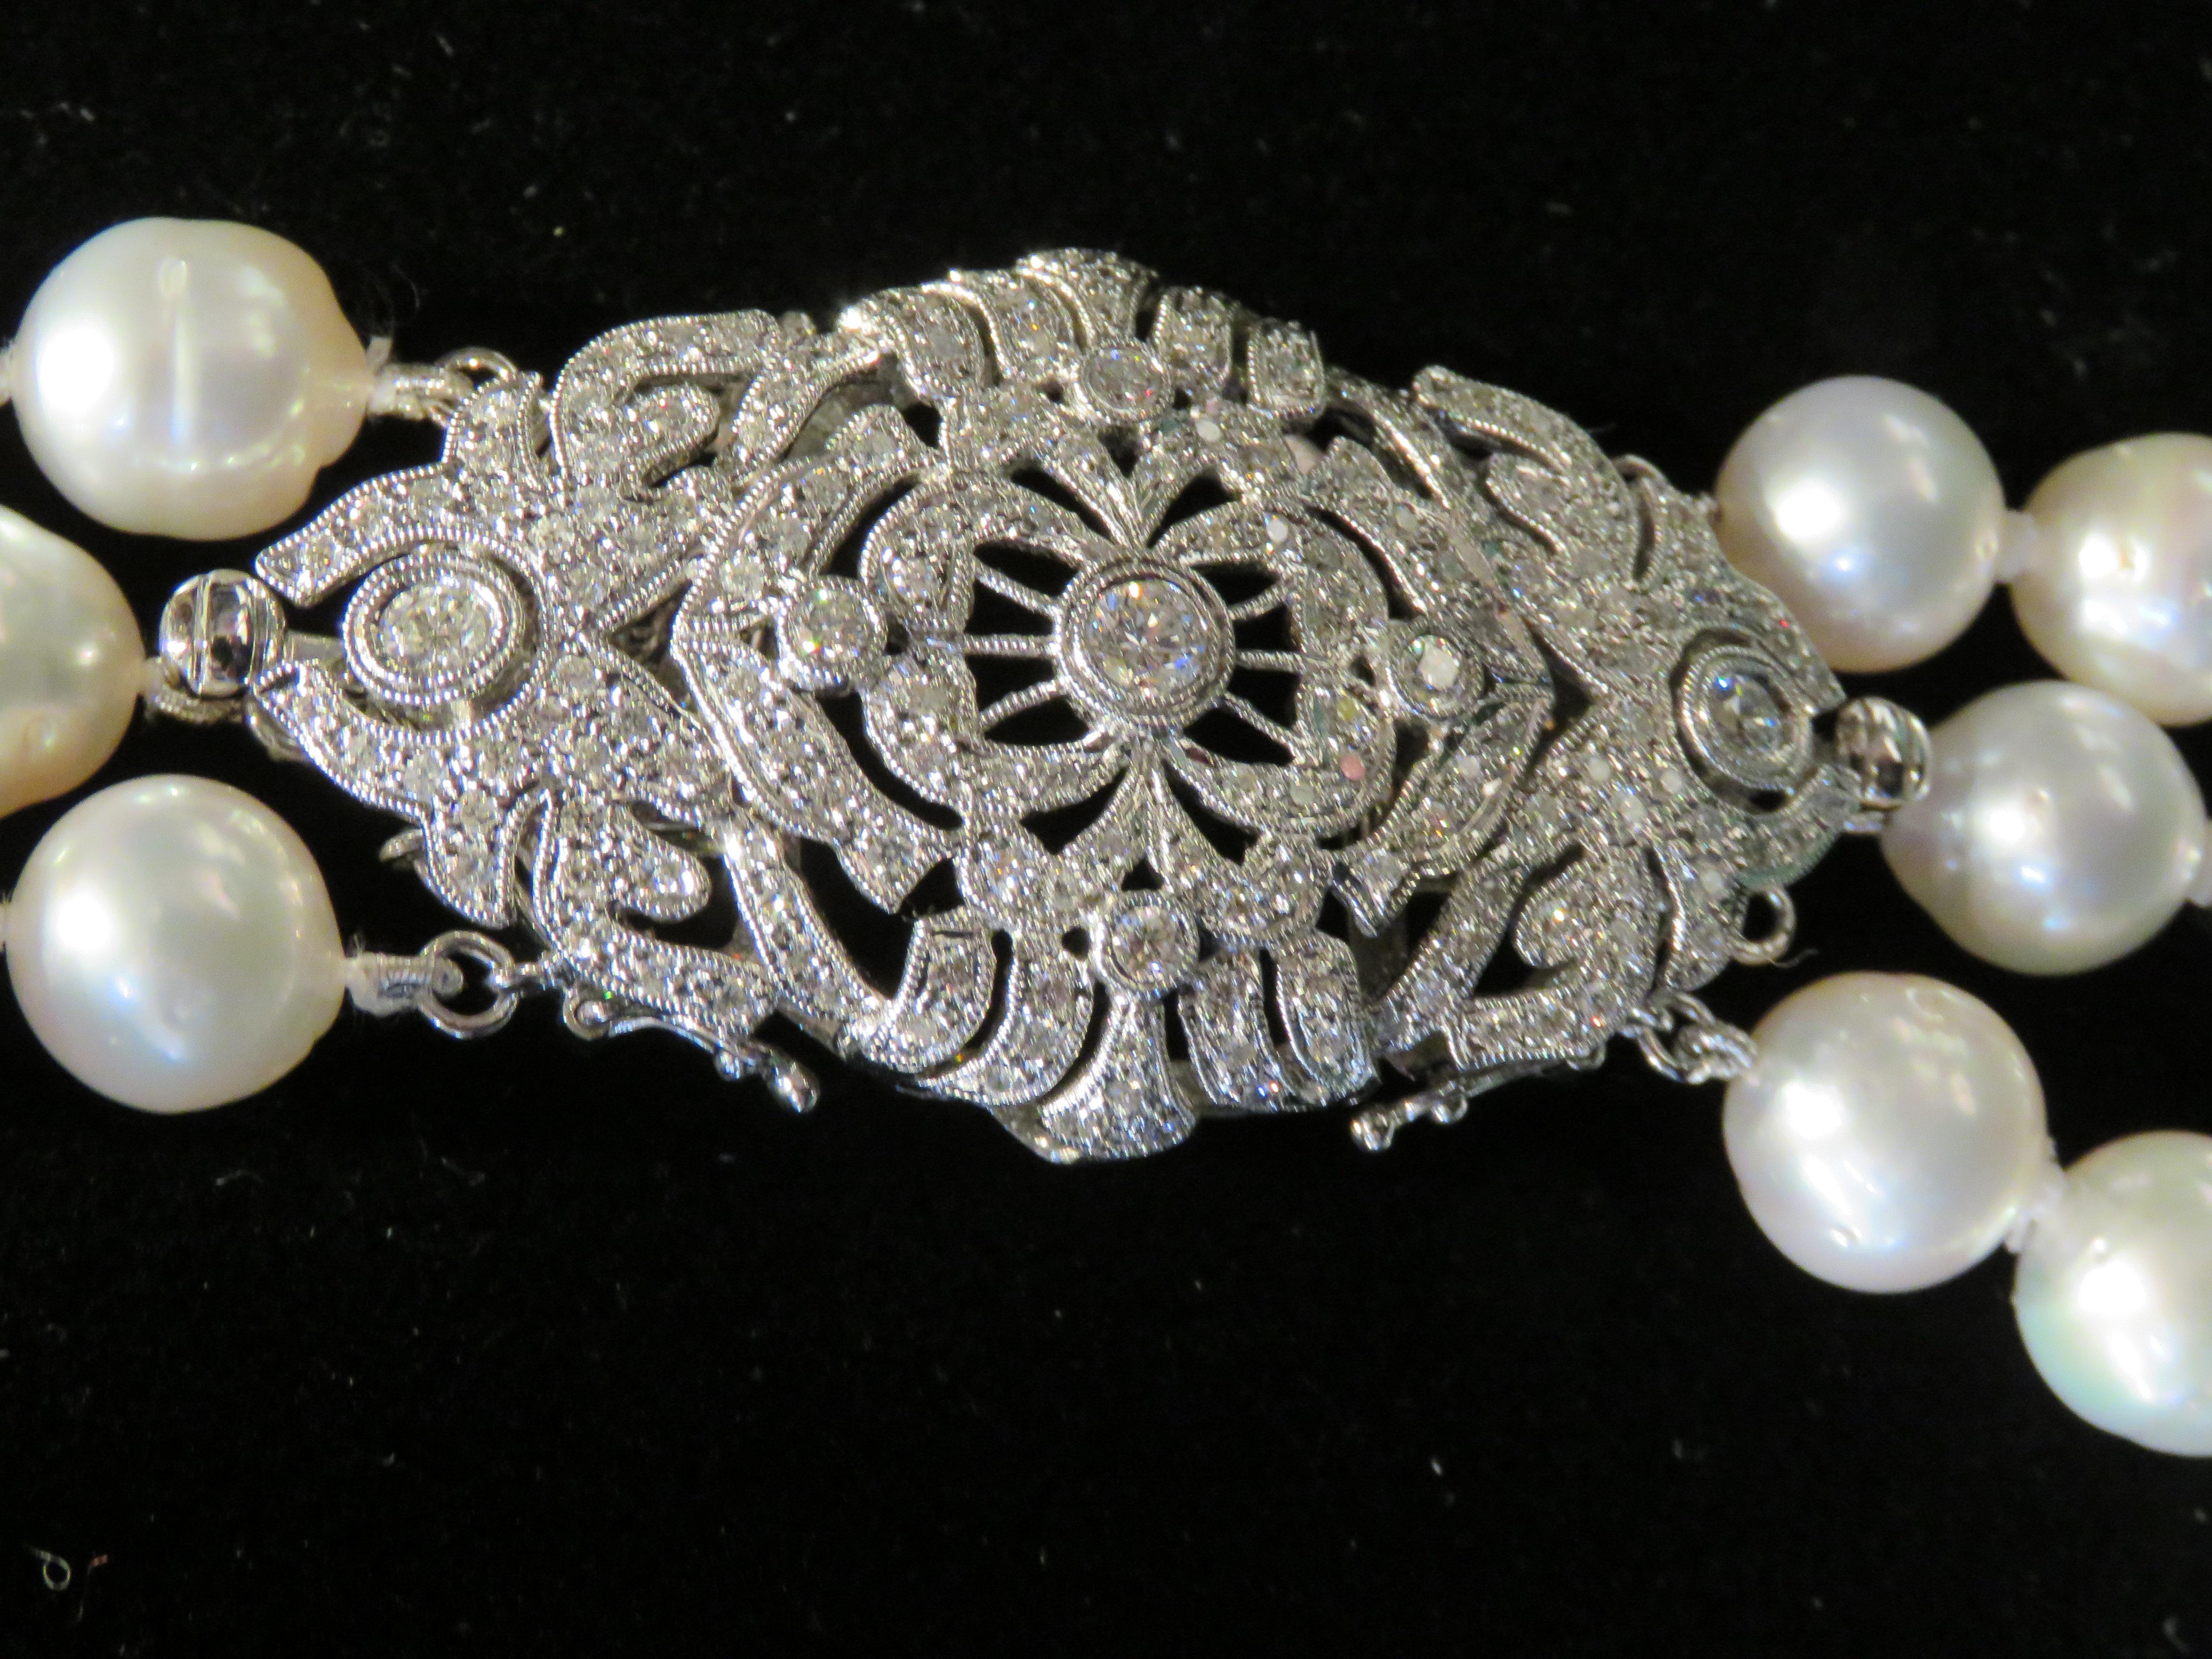 The Following Item we are offering is this Beautiful Rare Important 18KT White Gold Triple Strand South Sea Baroque Pearl and Diamond Necklace. Necklace is comprised of approx 144 Beautiful Magnificent High Luster Large White Baroque SOUTH SEA